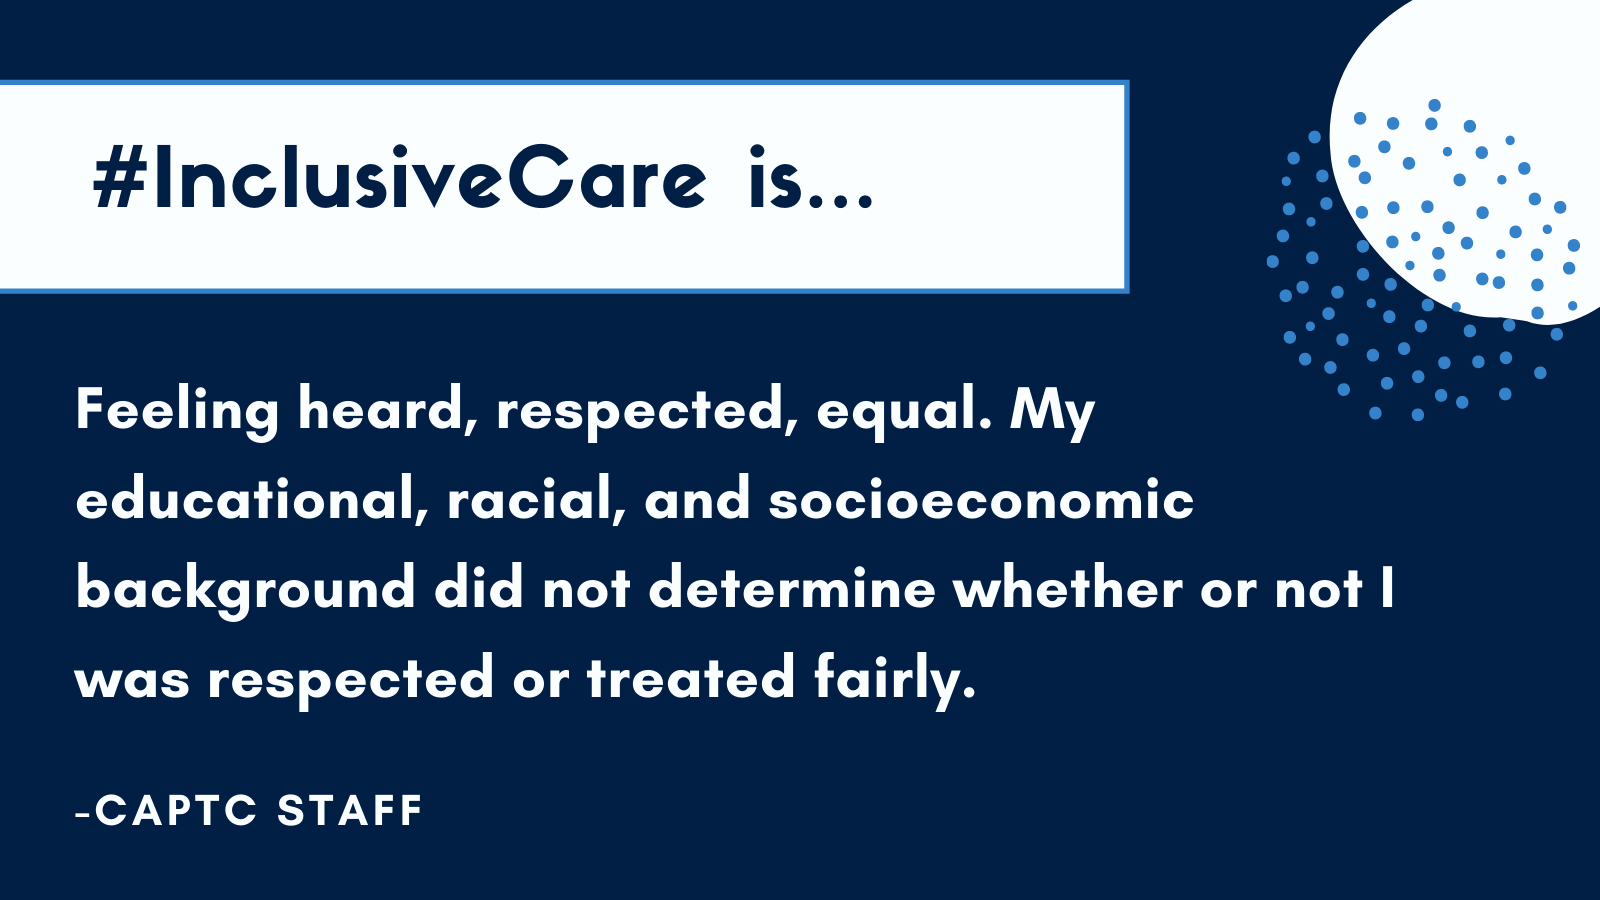 #inclusivecare is Feeling heard, respected, equal. My educational, racial, and socioeconomic background did not determine whether or not I was respected or treated fairly.. CAPTC Staff